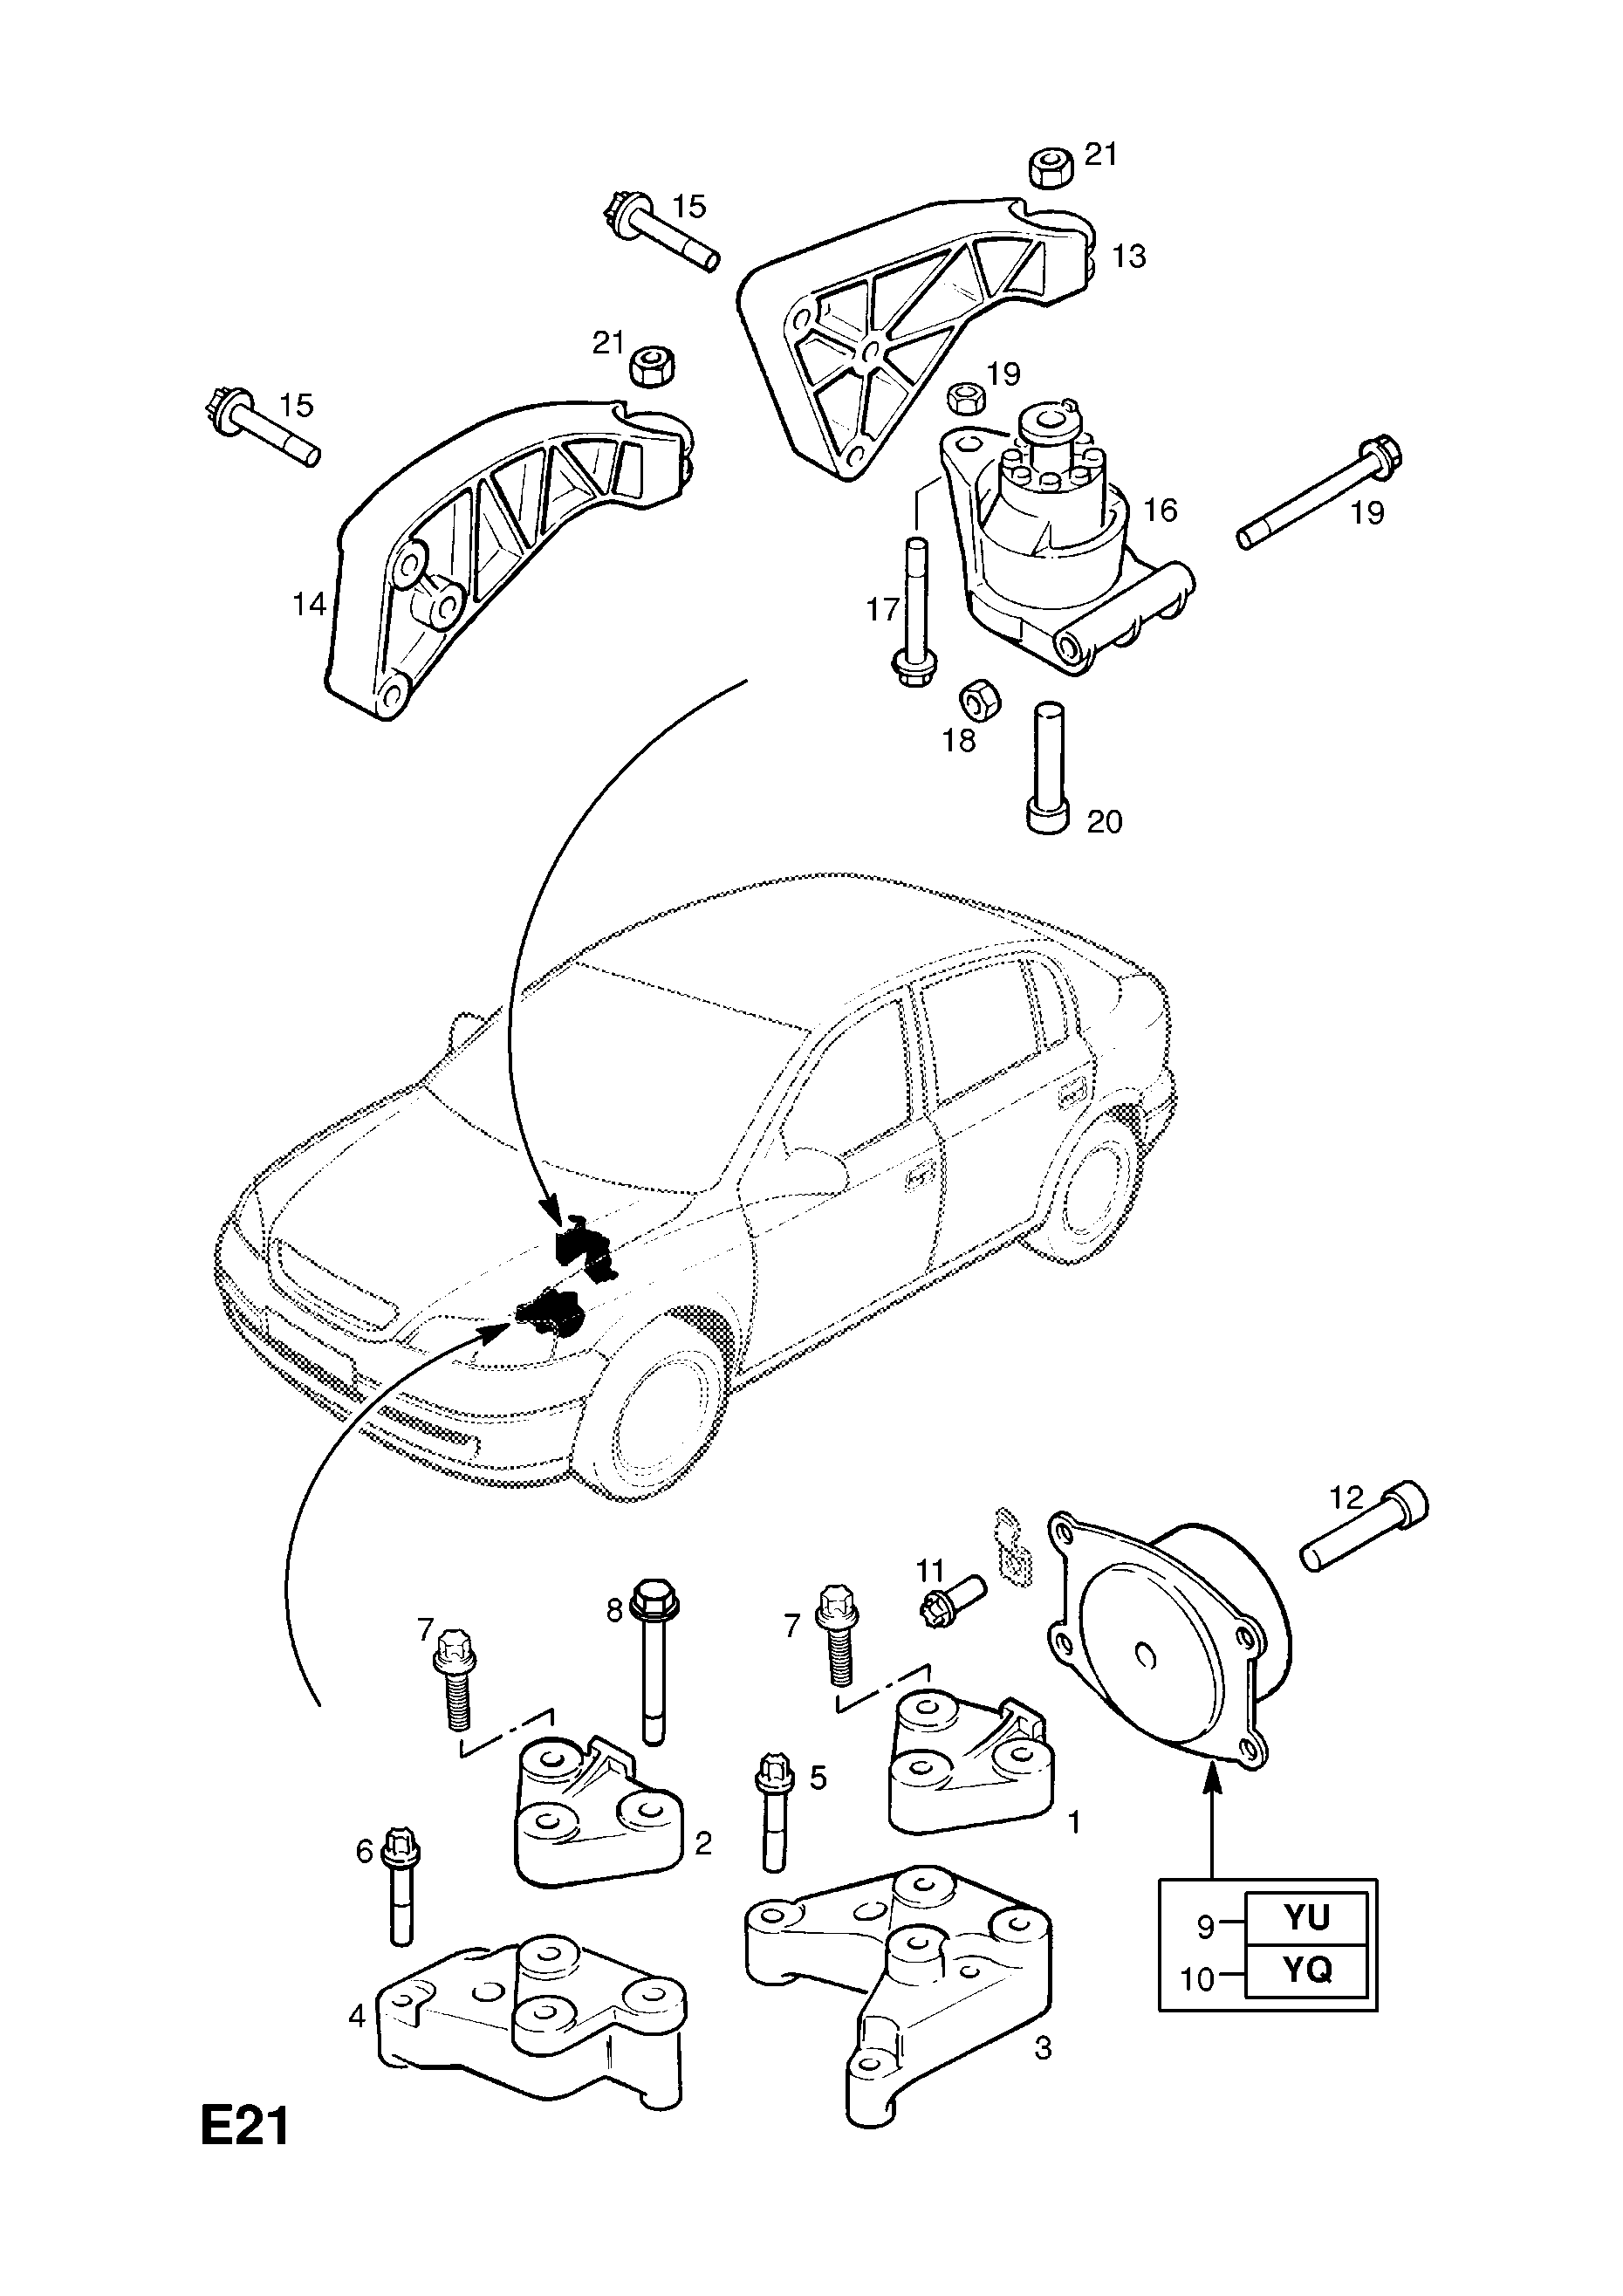 ENGINE MOUNTINGS (CONTD.) <small><i>[REAR ENGINE MOUNTING]</i></small>